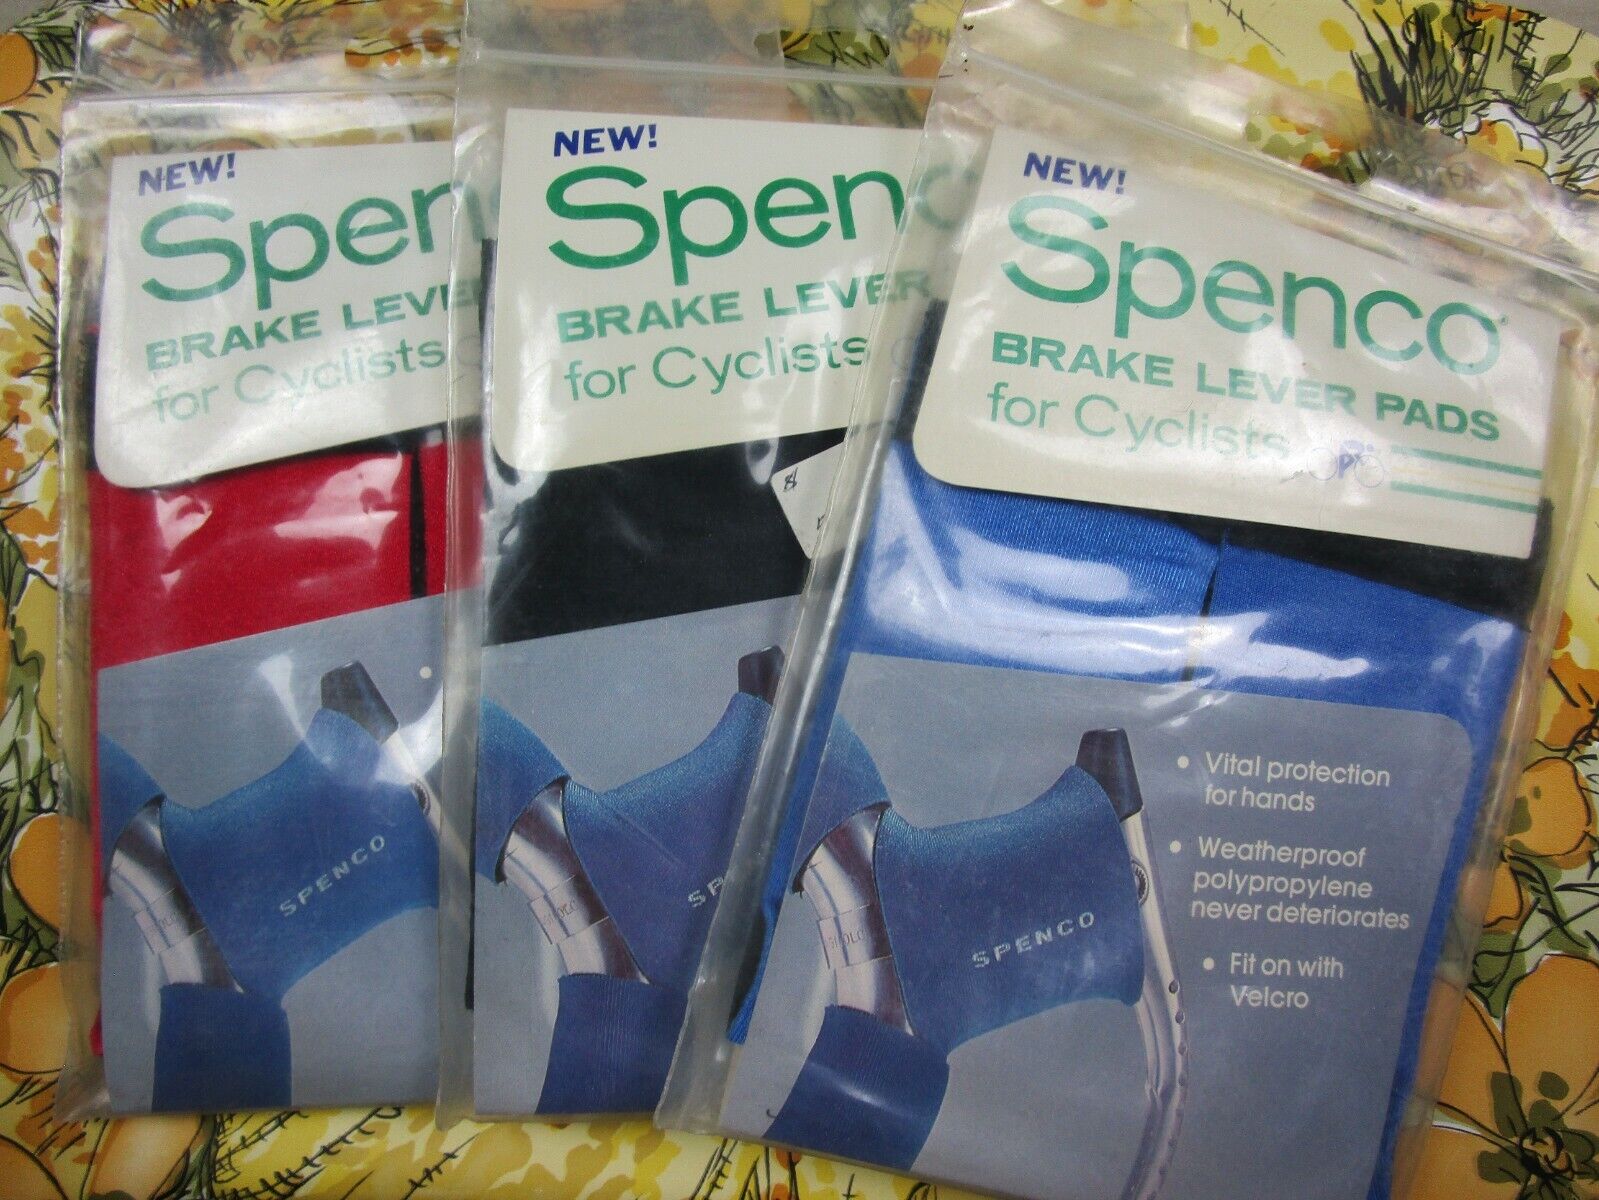 NOS Vintage SPENCO Lot 3 Bicycle Brake Lever Hoods Pads FOR CYCLISTS MADE IN USA